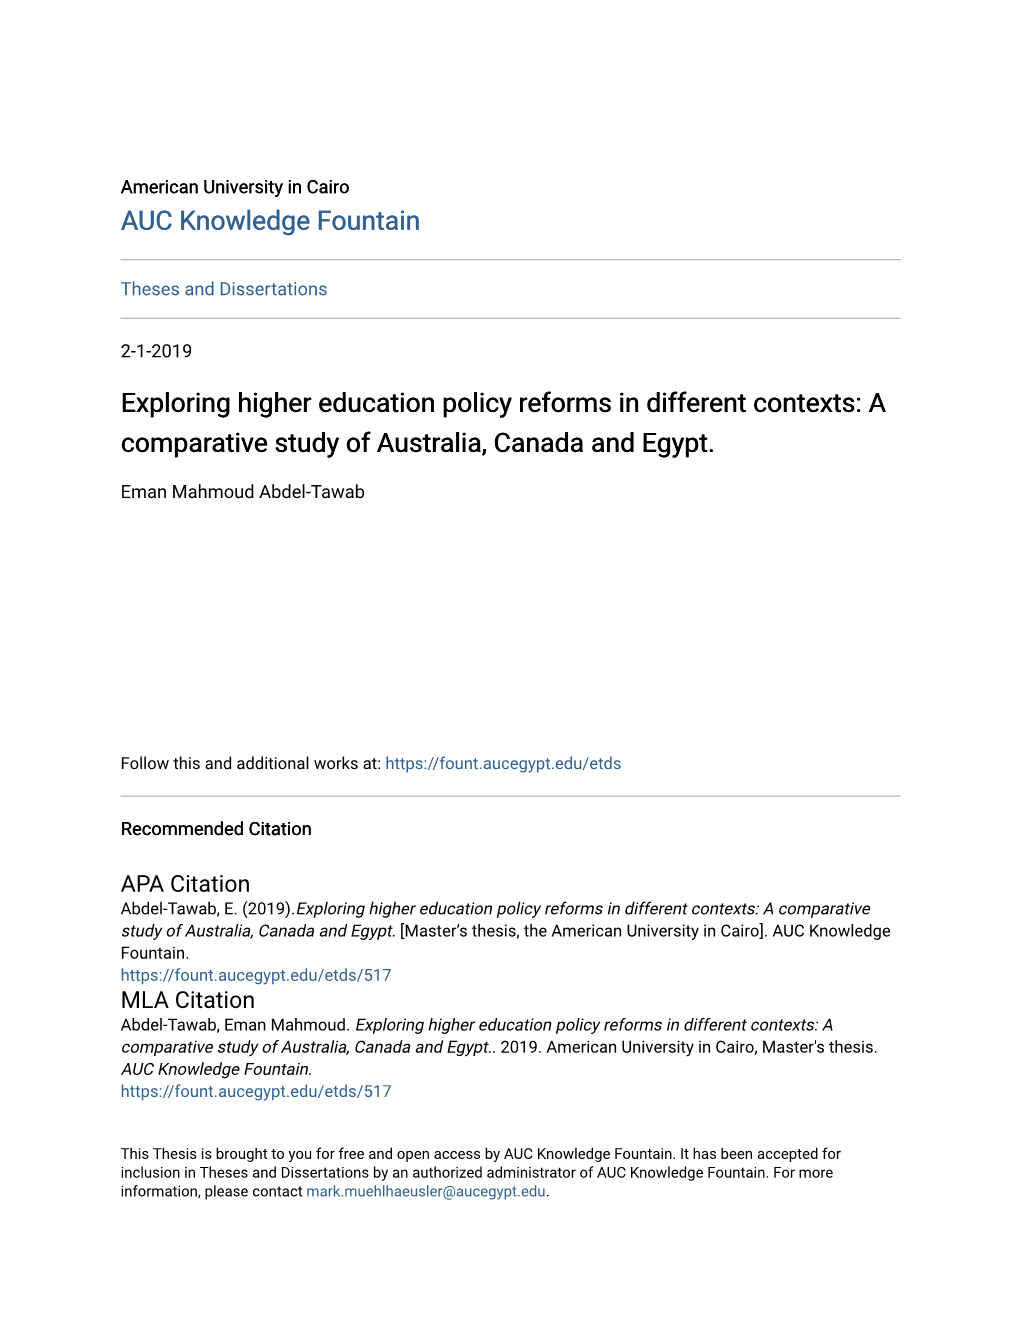 Exploring Higher Education Policy Reforms in Different Contexts: a Comparative Study of Australia, Canada and Egypt